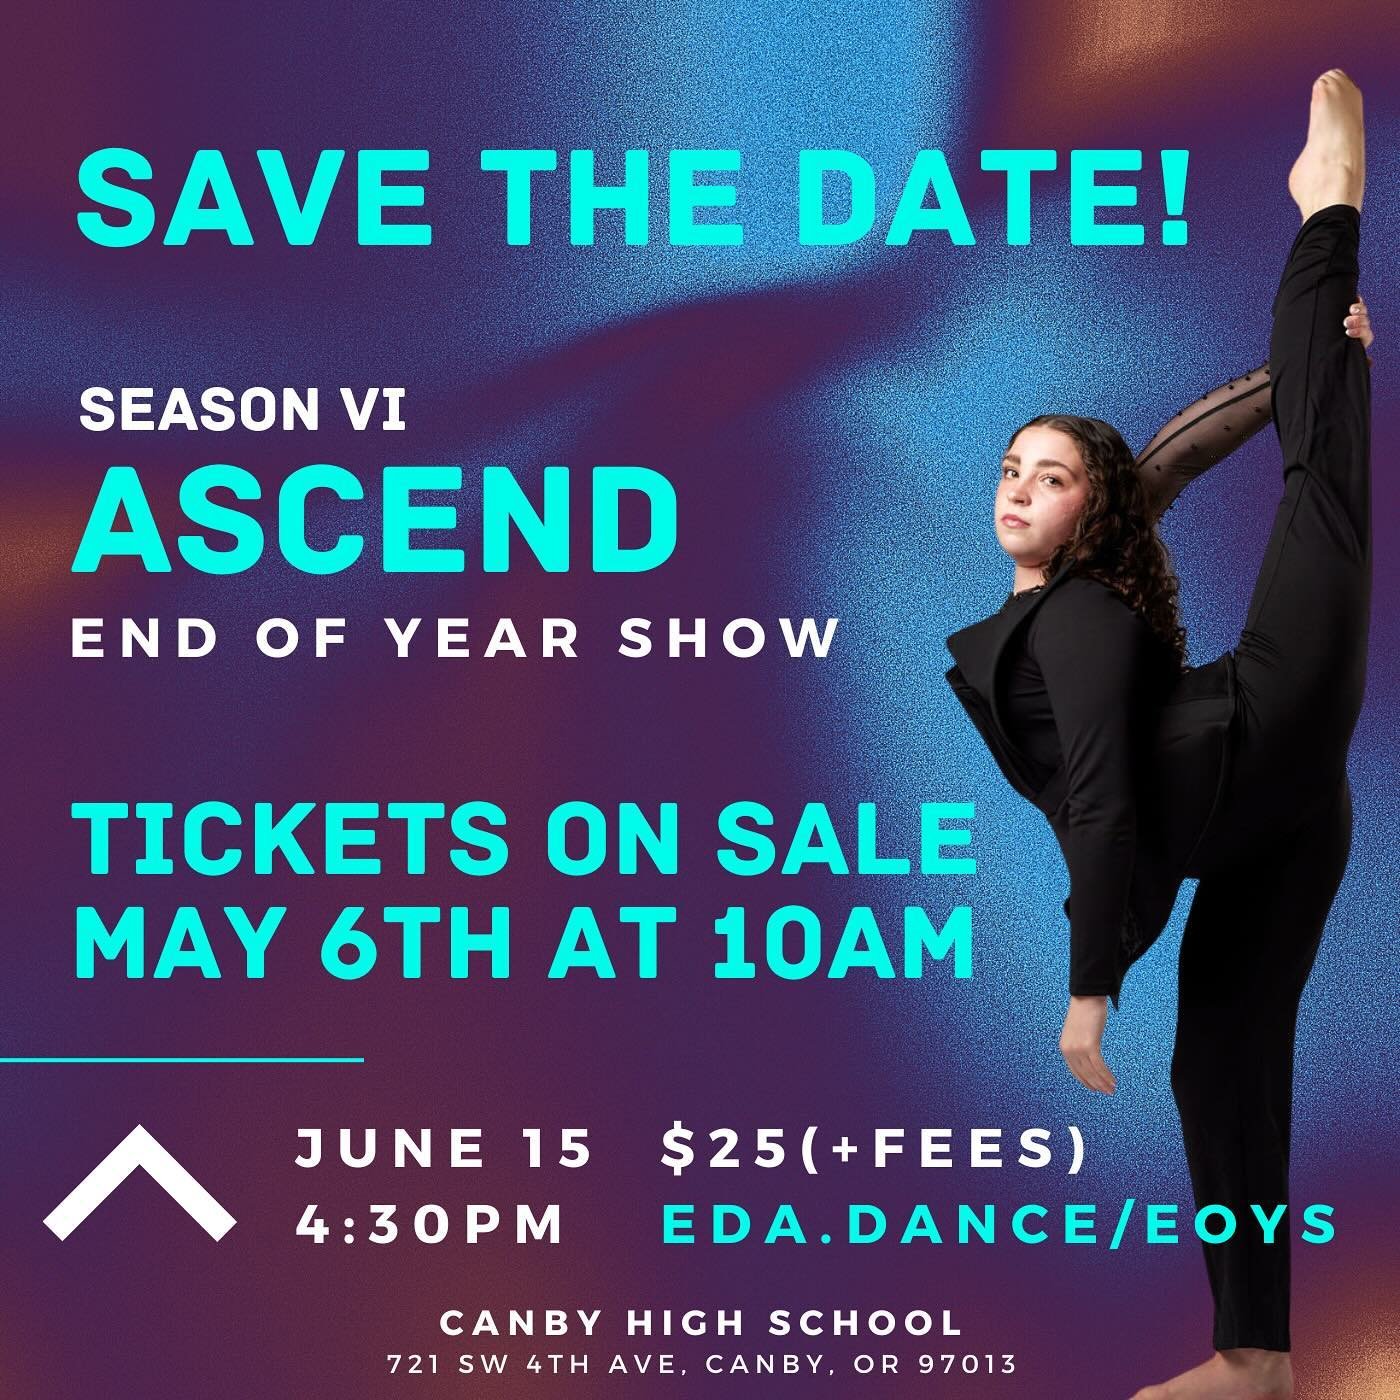 Mark your calendars &mdash; tickets for our Season VI End of Year Show will go live for purchase on May 6th at 10am! You can find the ticket purchase link on our website at eda.dance/eoys. Once they open up, we have assigned seating and they will go 